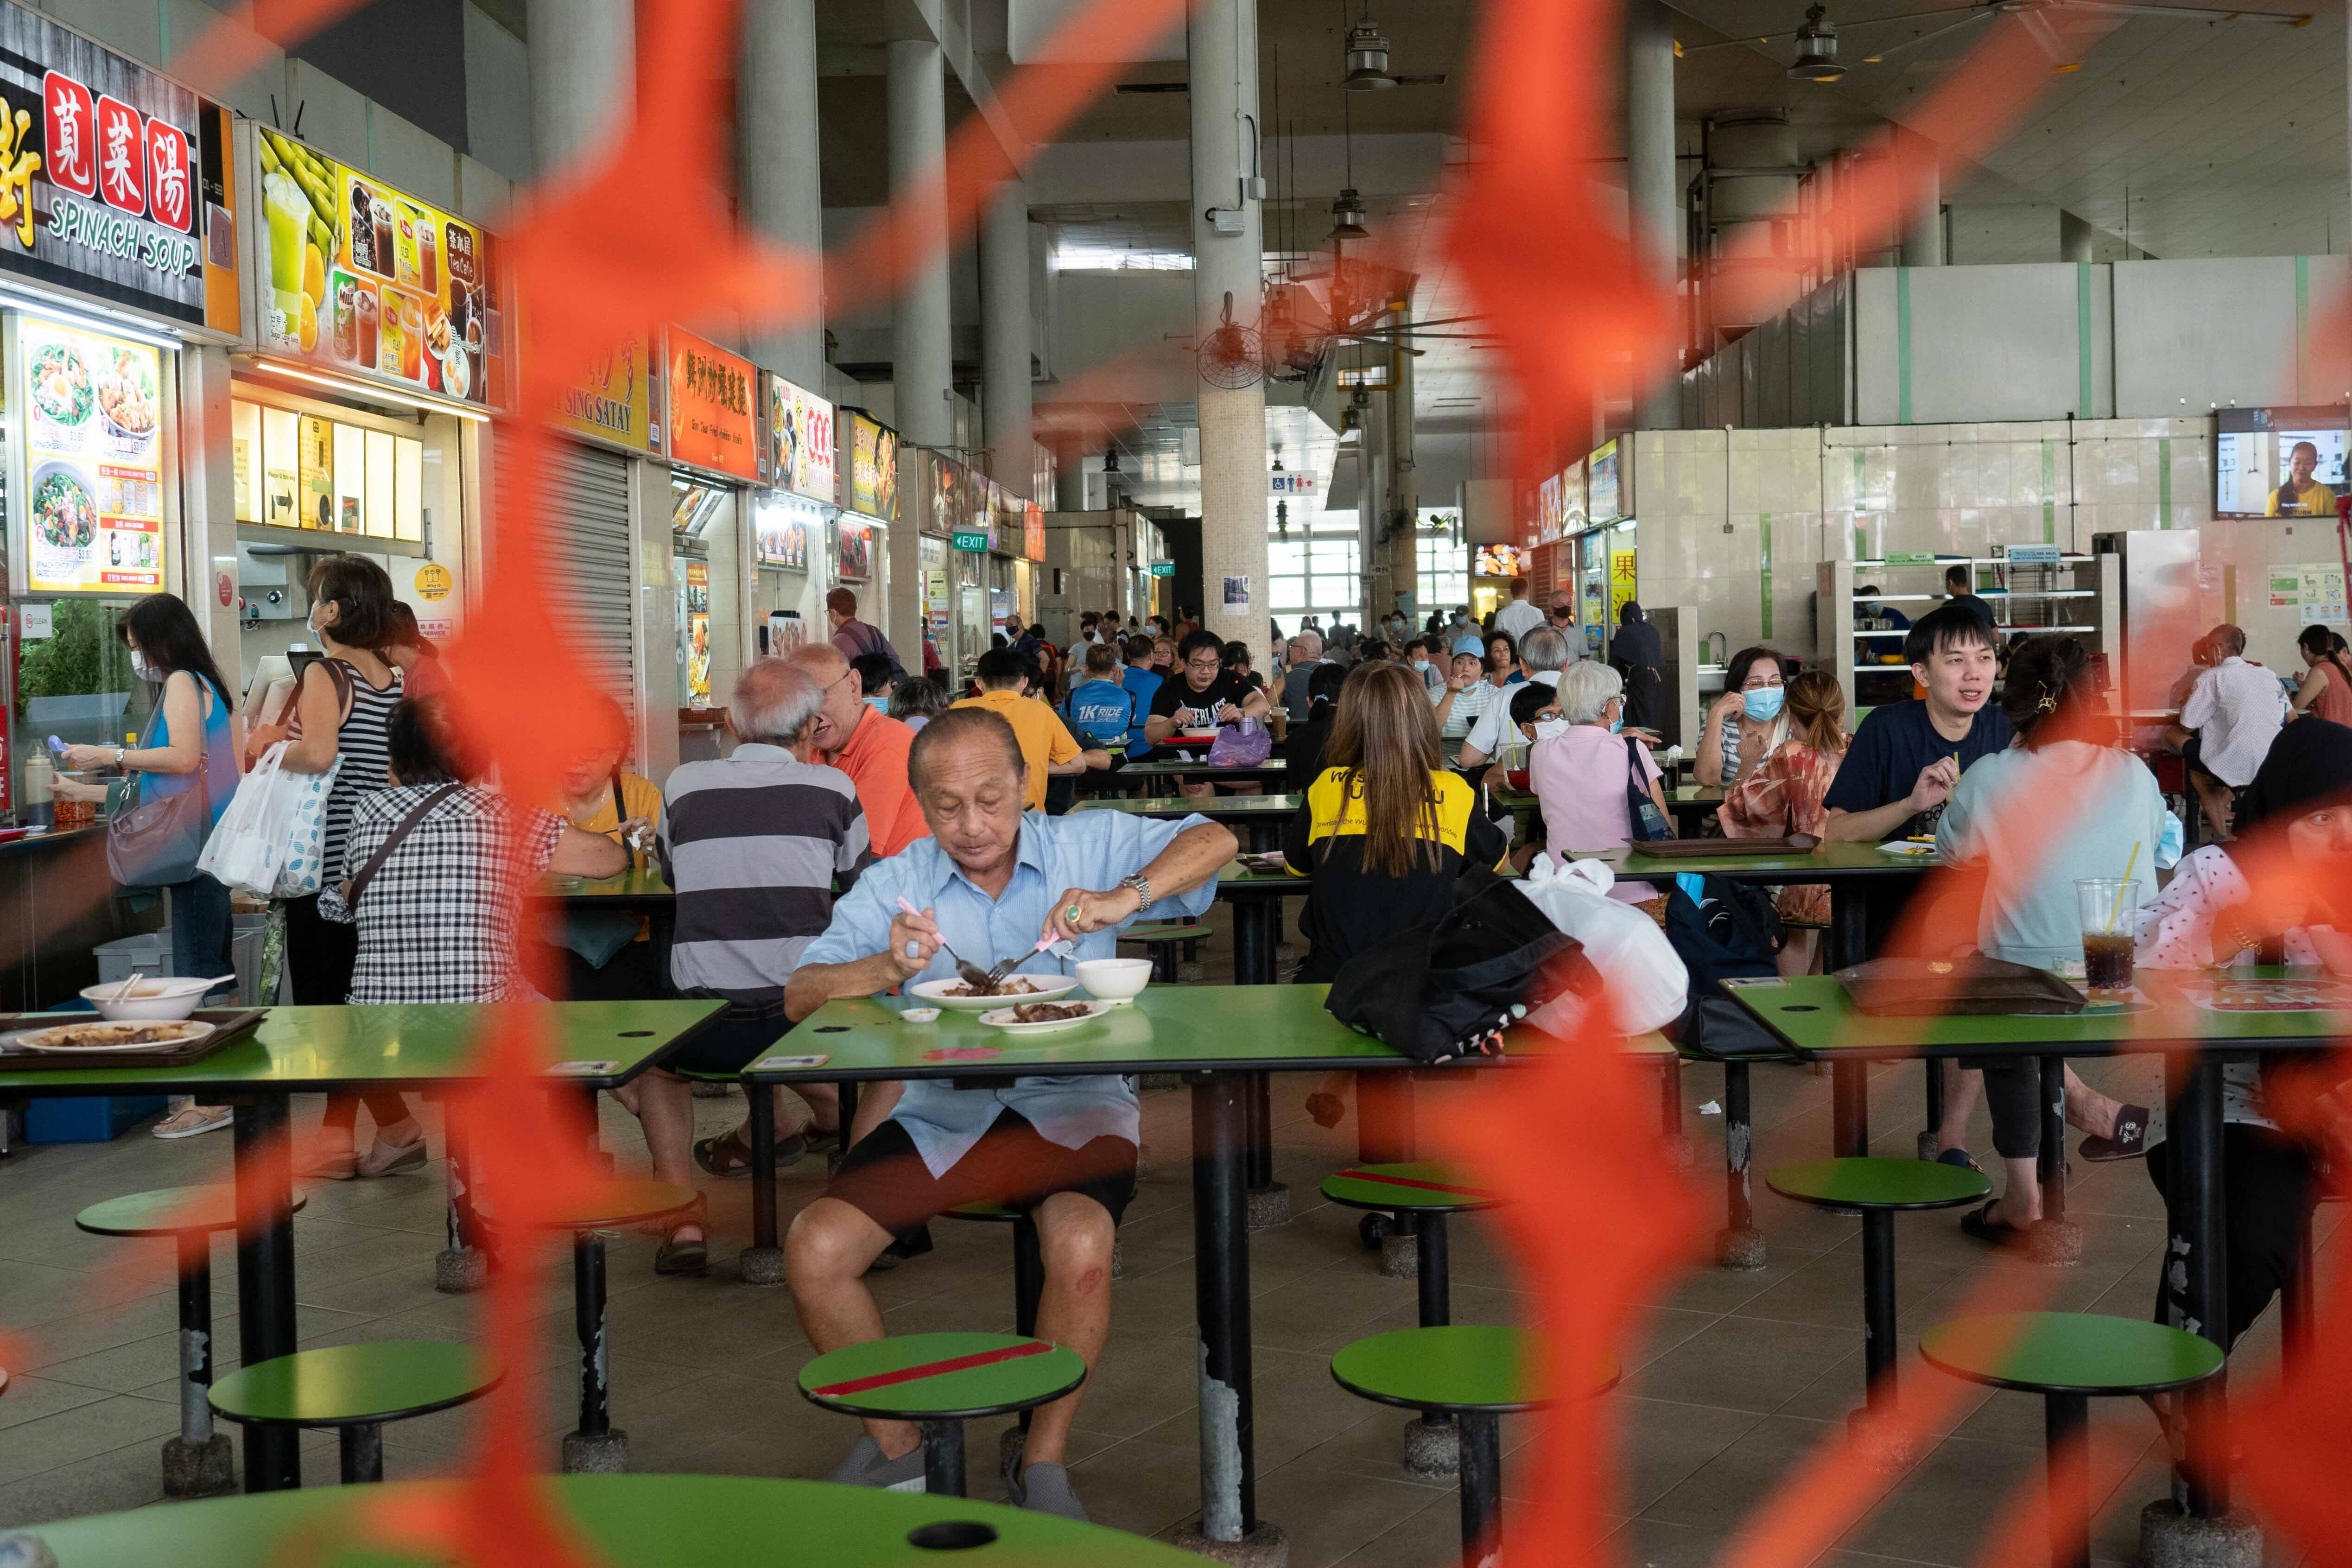 6 non-fully vaccinated people found dining at hawker centres since Covid-19 restrictions eased: MSE